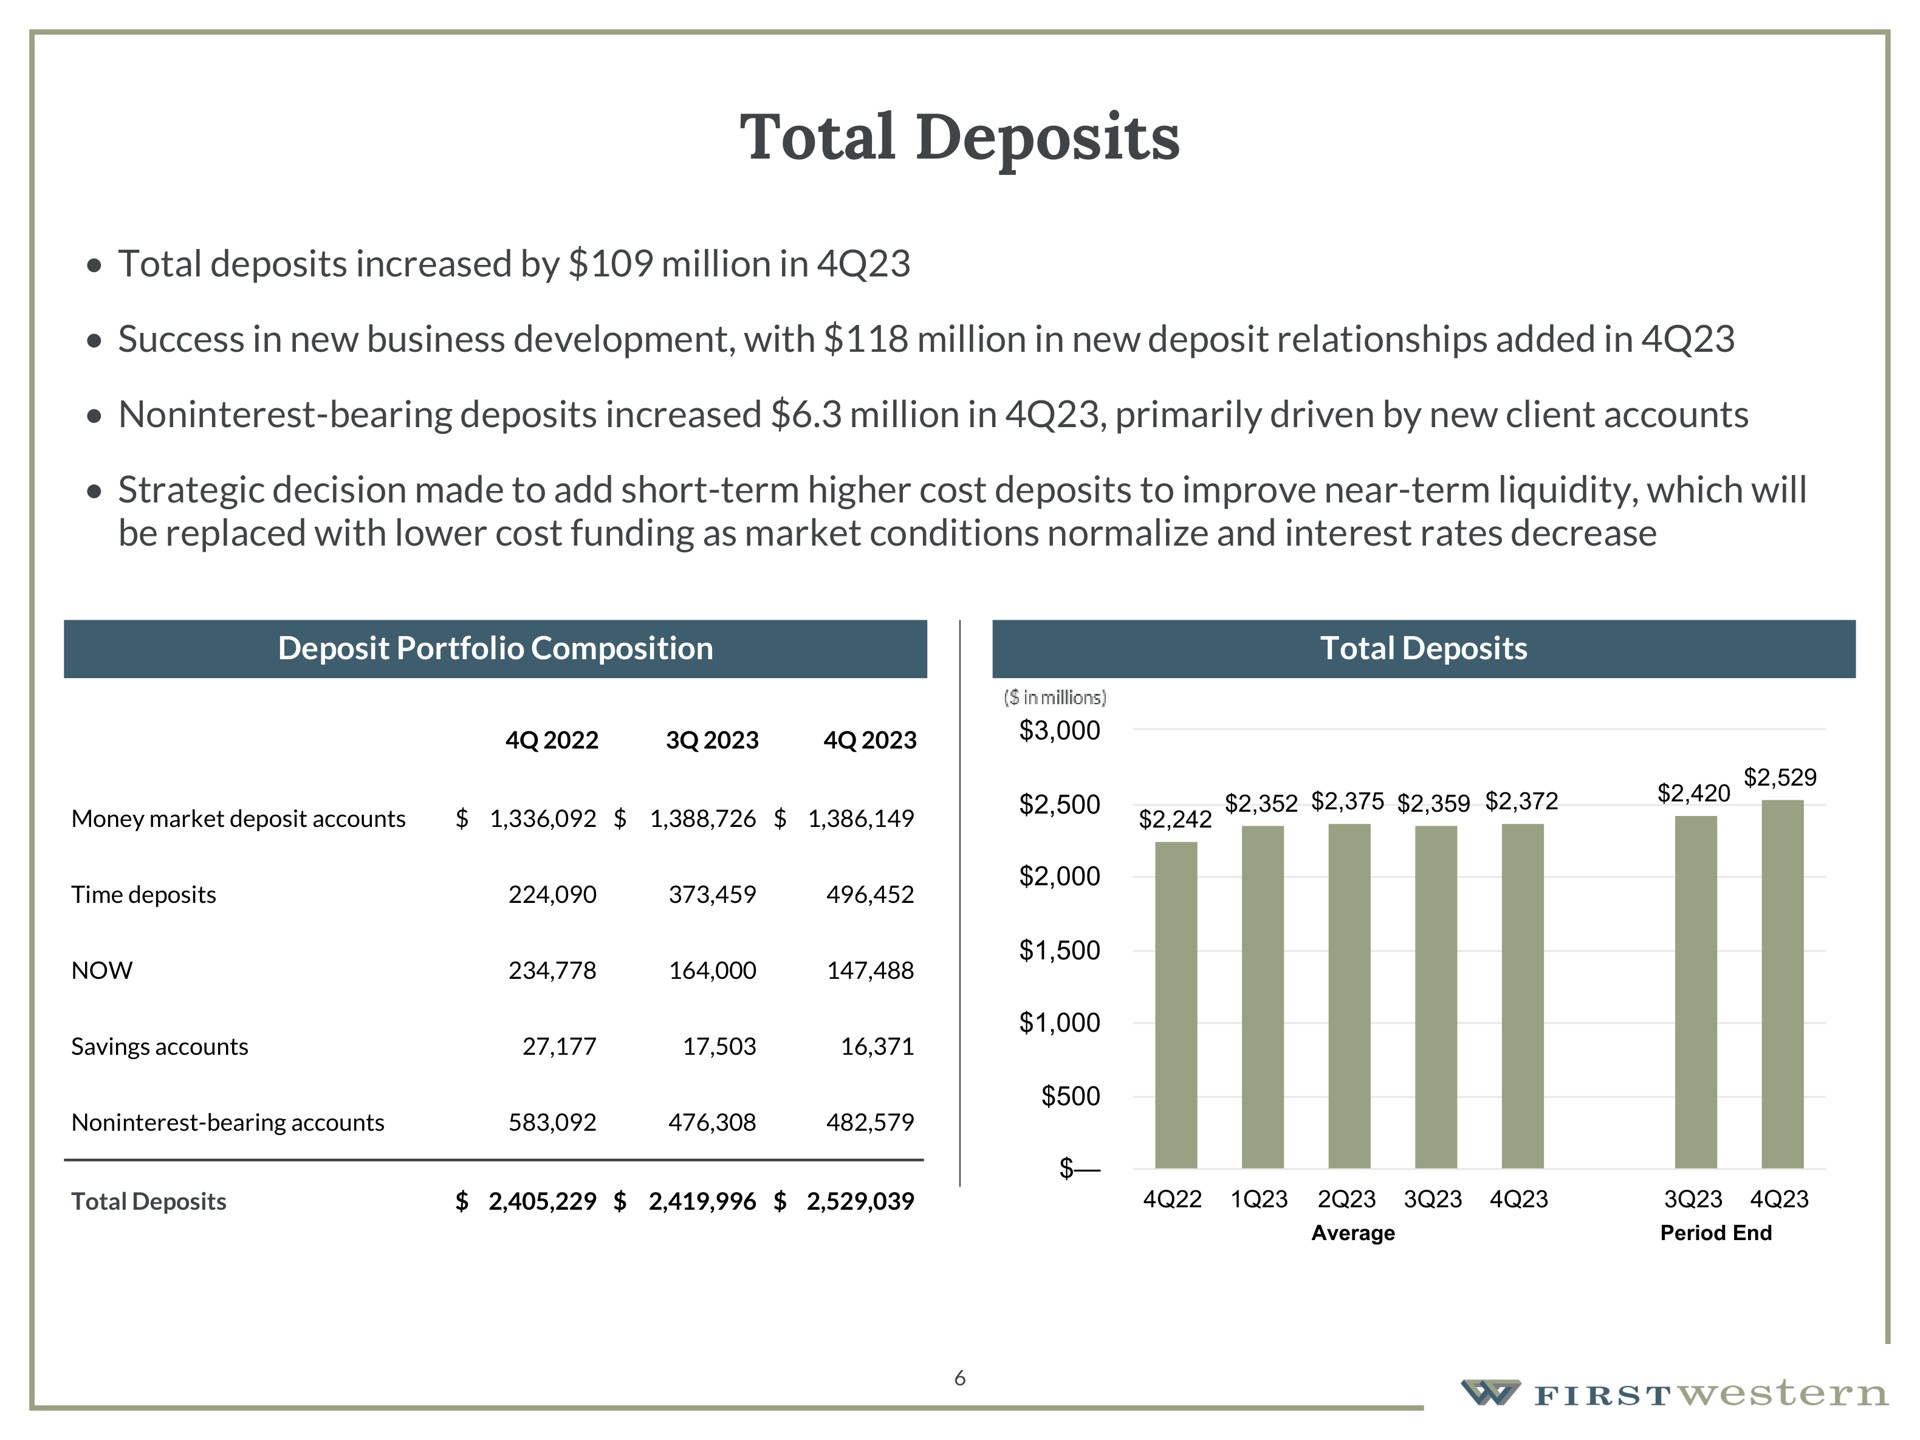 total deposits total deposits increased by million in success in new business development with million in new deposit relationships added in bearing deposits increased million in primarily driven by new client accounts strategic decision made to add short term higher cost deposits to improve near term liquidity which will be replaced with lower cost funding as market conditions normalize and interest rates decrease deposit portfolio composition total deposits | First Western Financial